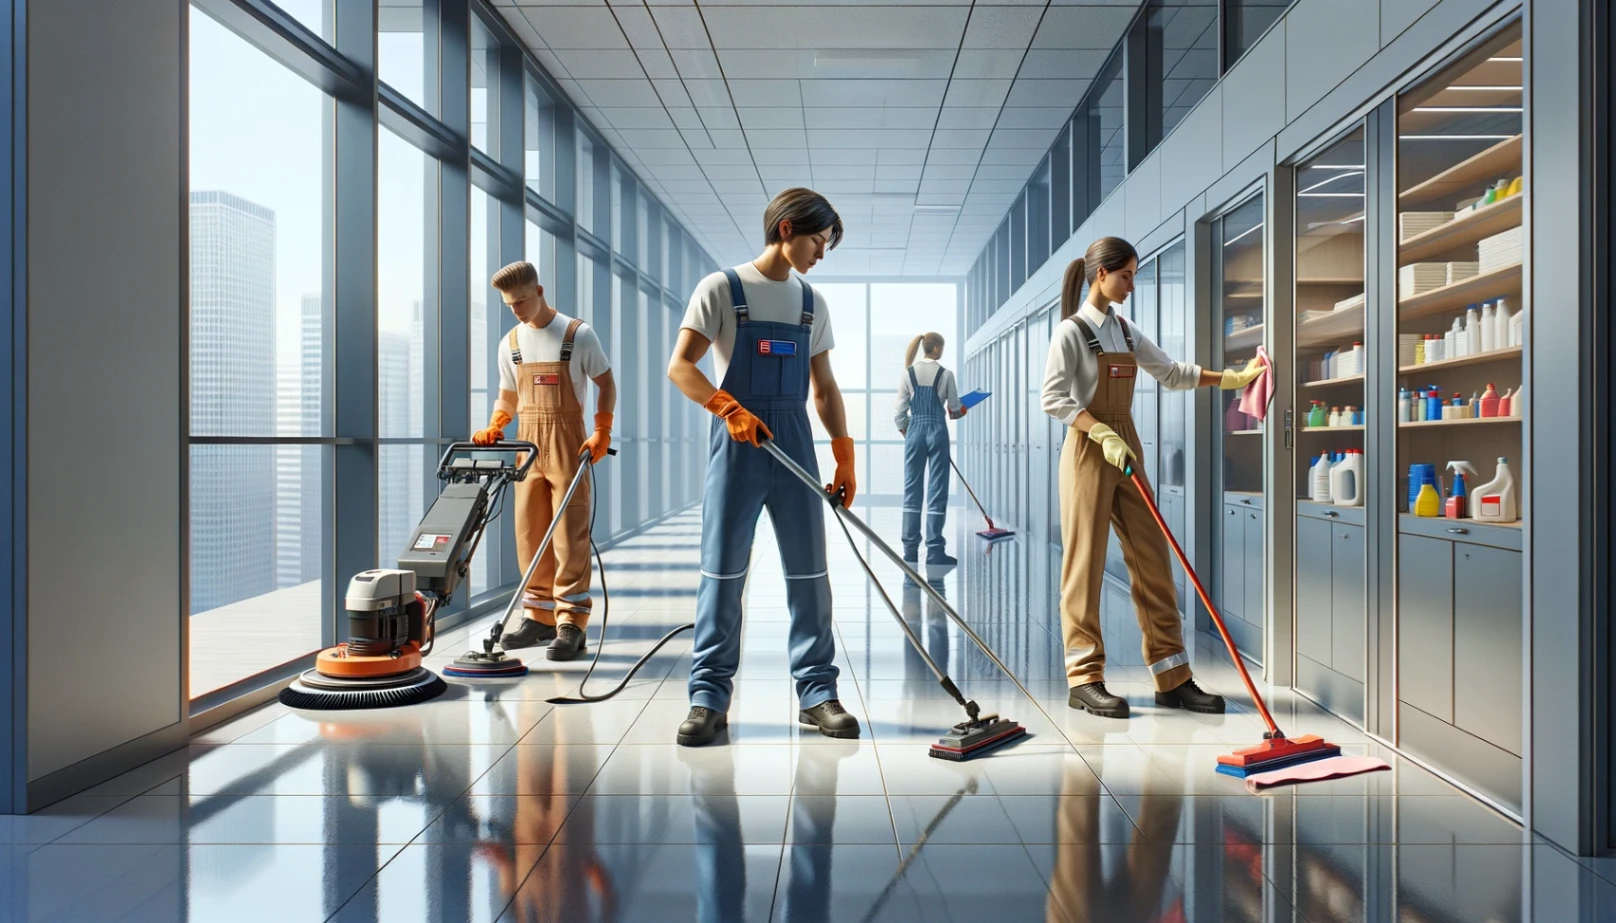 Janitorial Work: Earn Up to $18/Hour, No Experience Needed